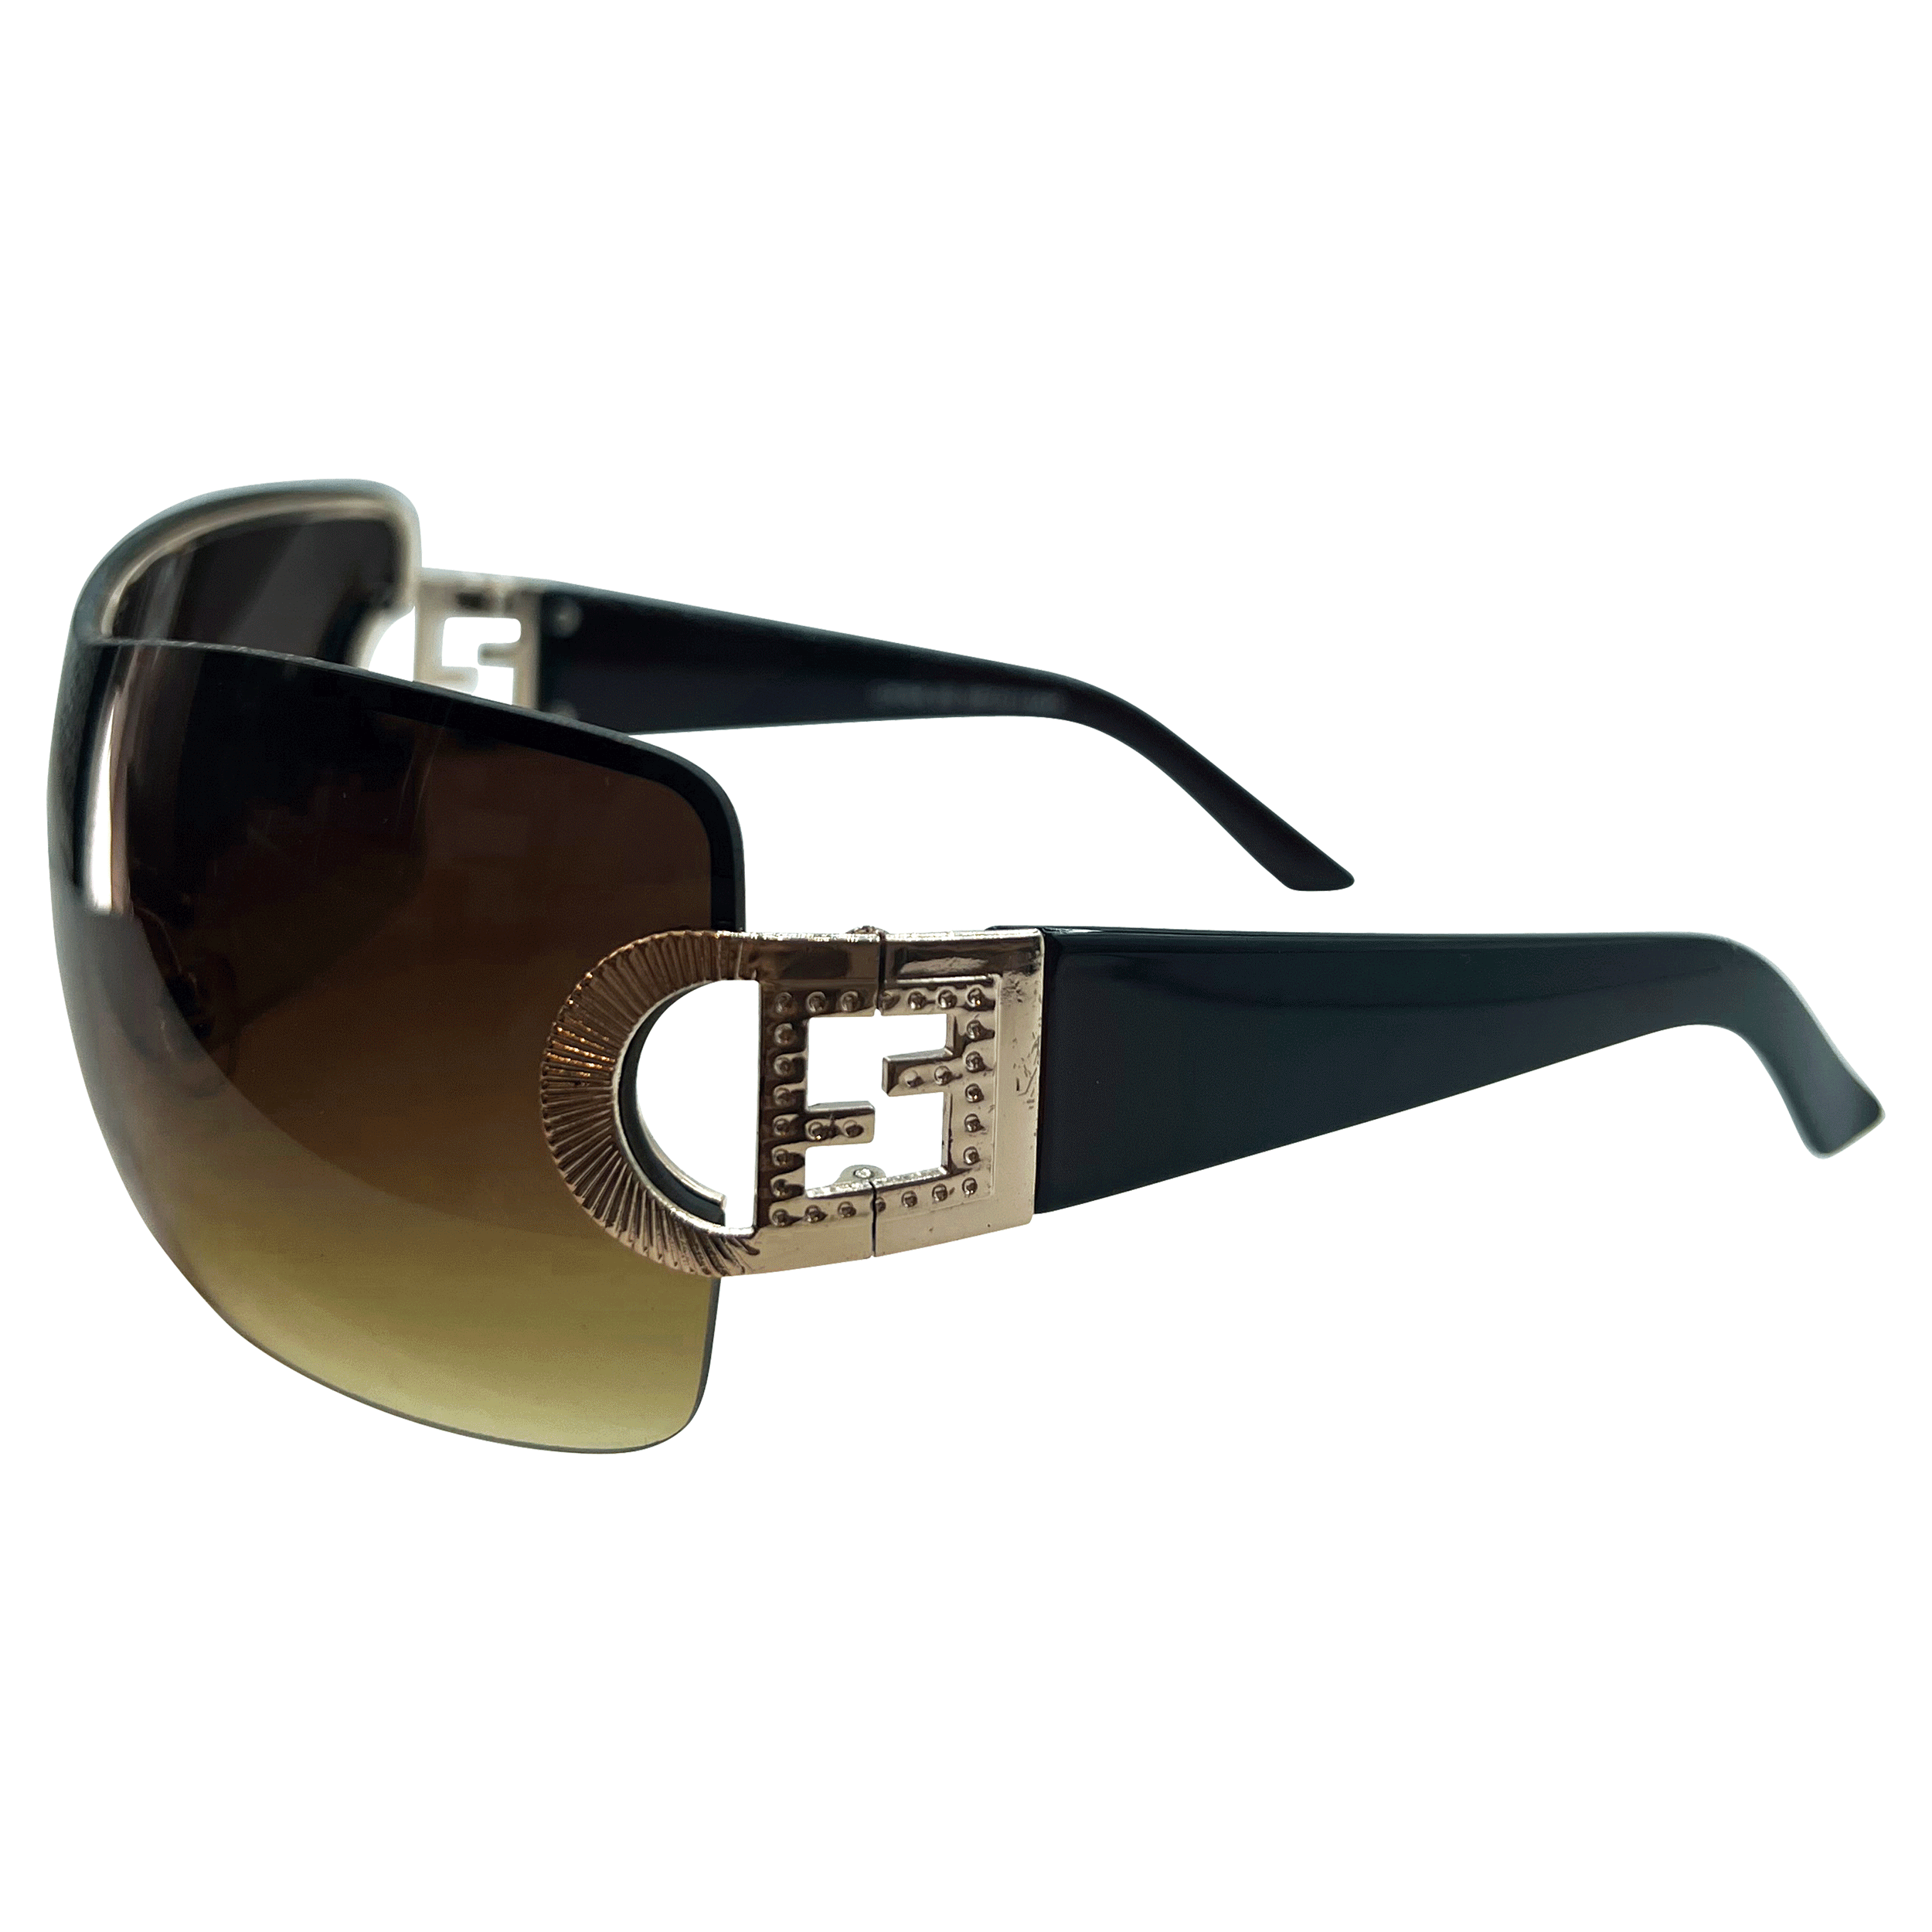 SUGARBABY Rimless Shield Y2K Gold/Amber Sunglasses